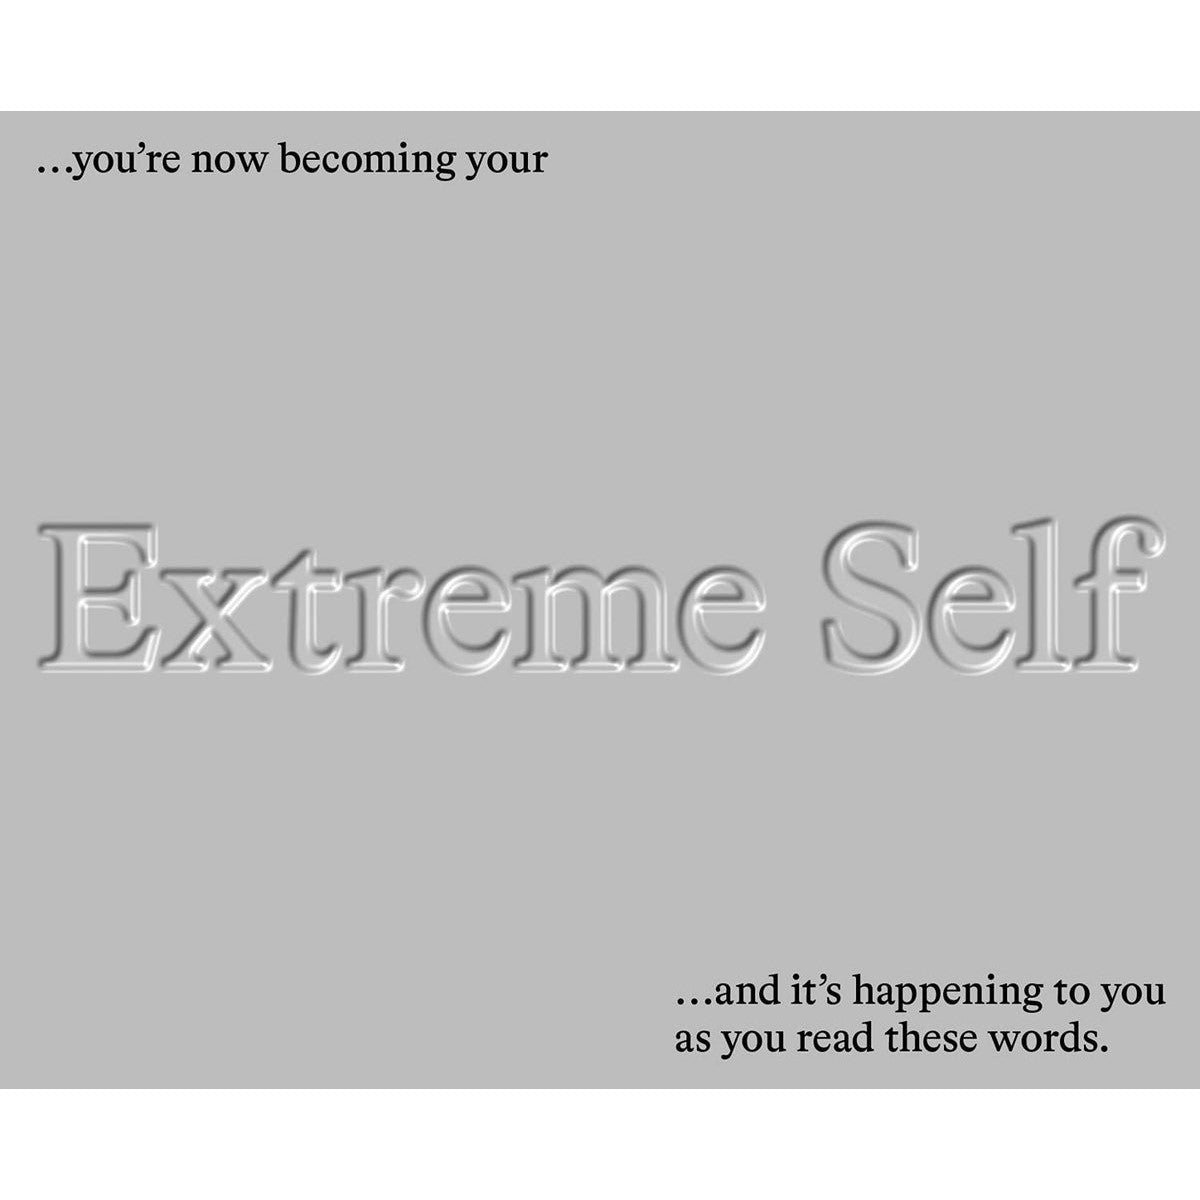 The Extreme Self